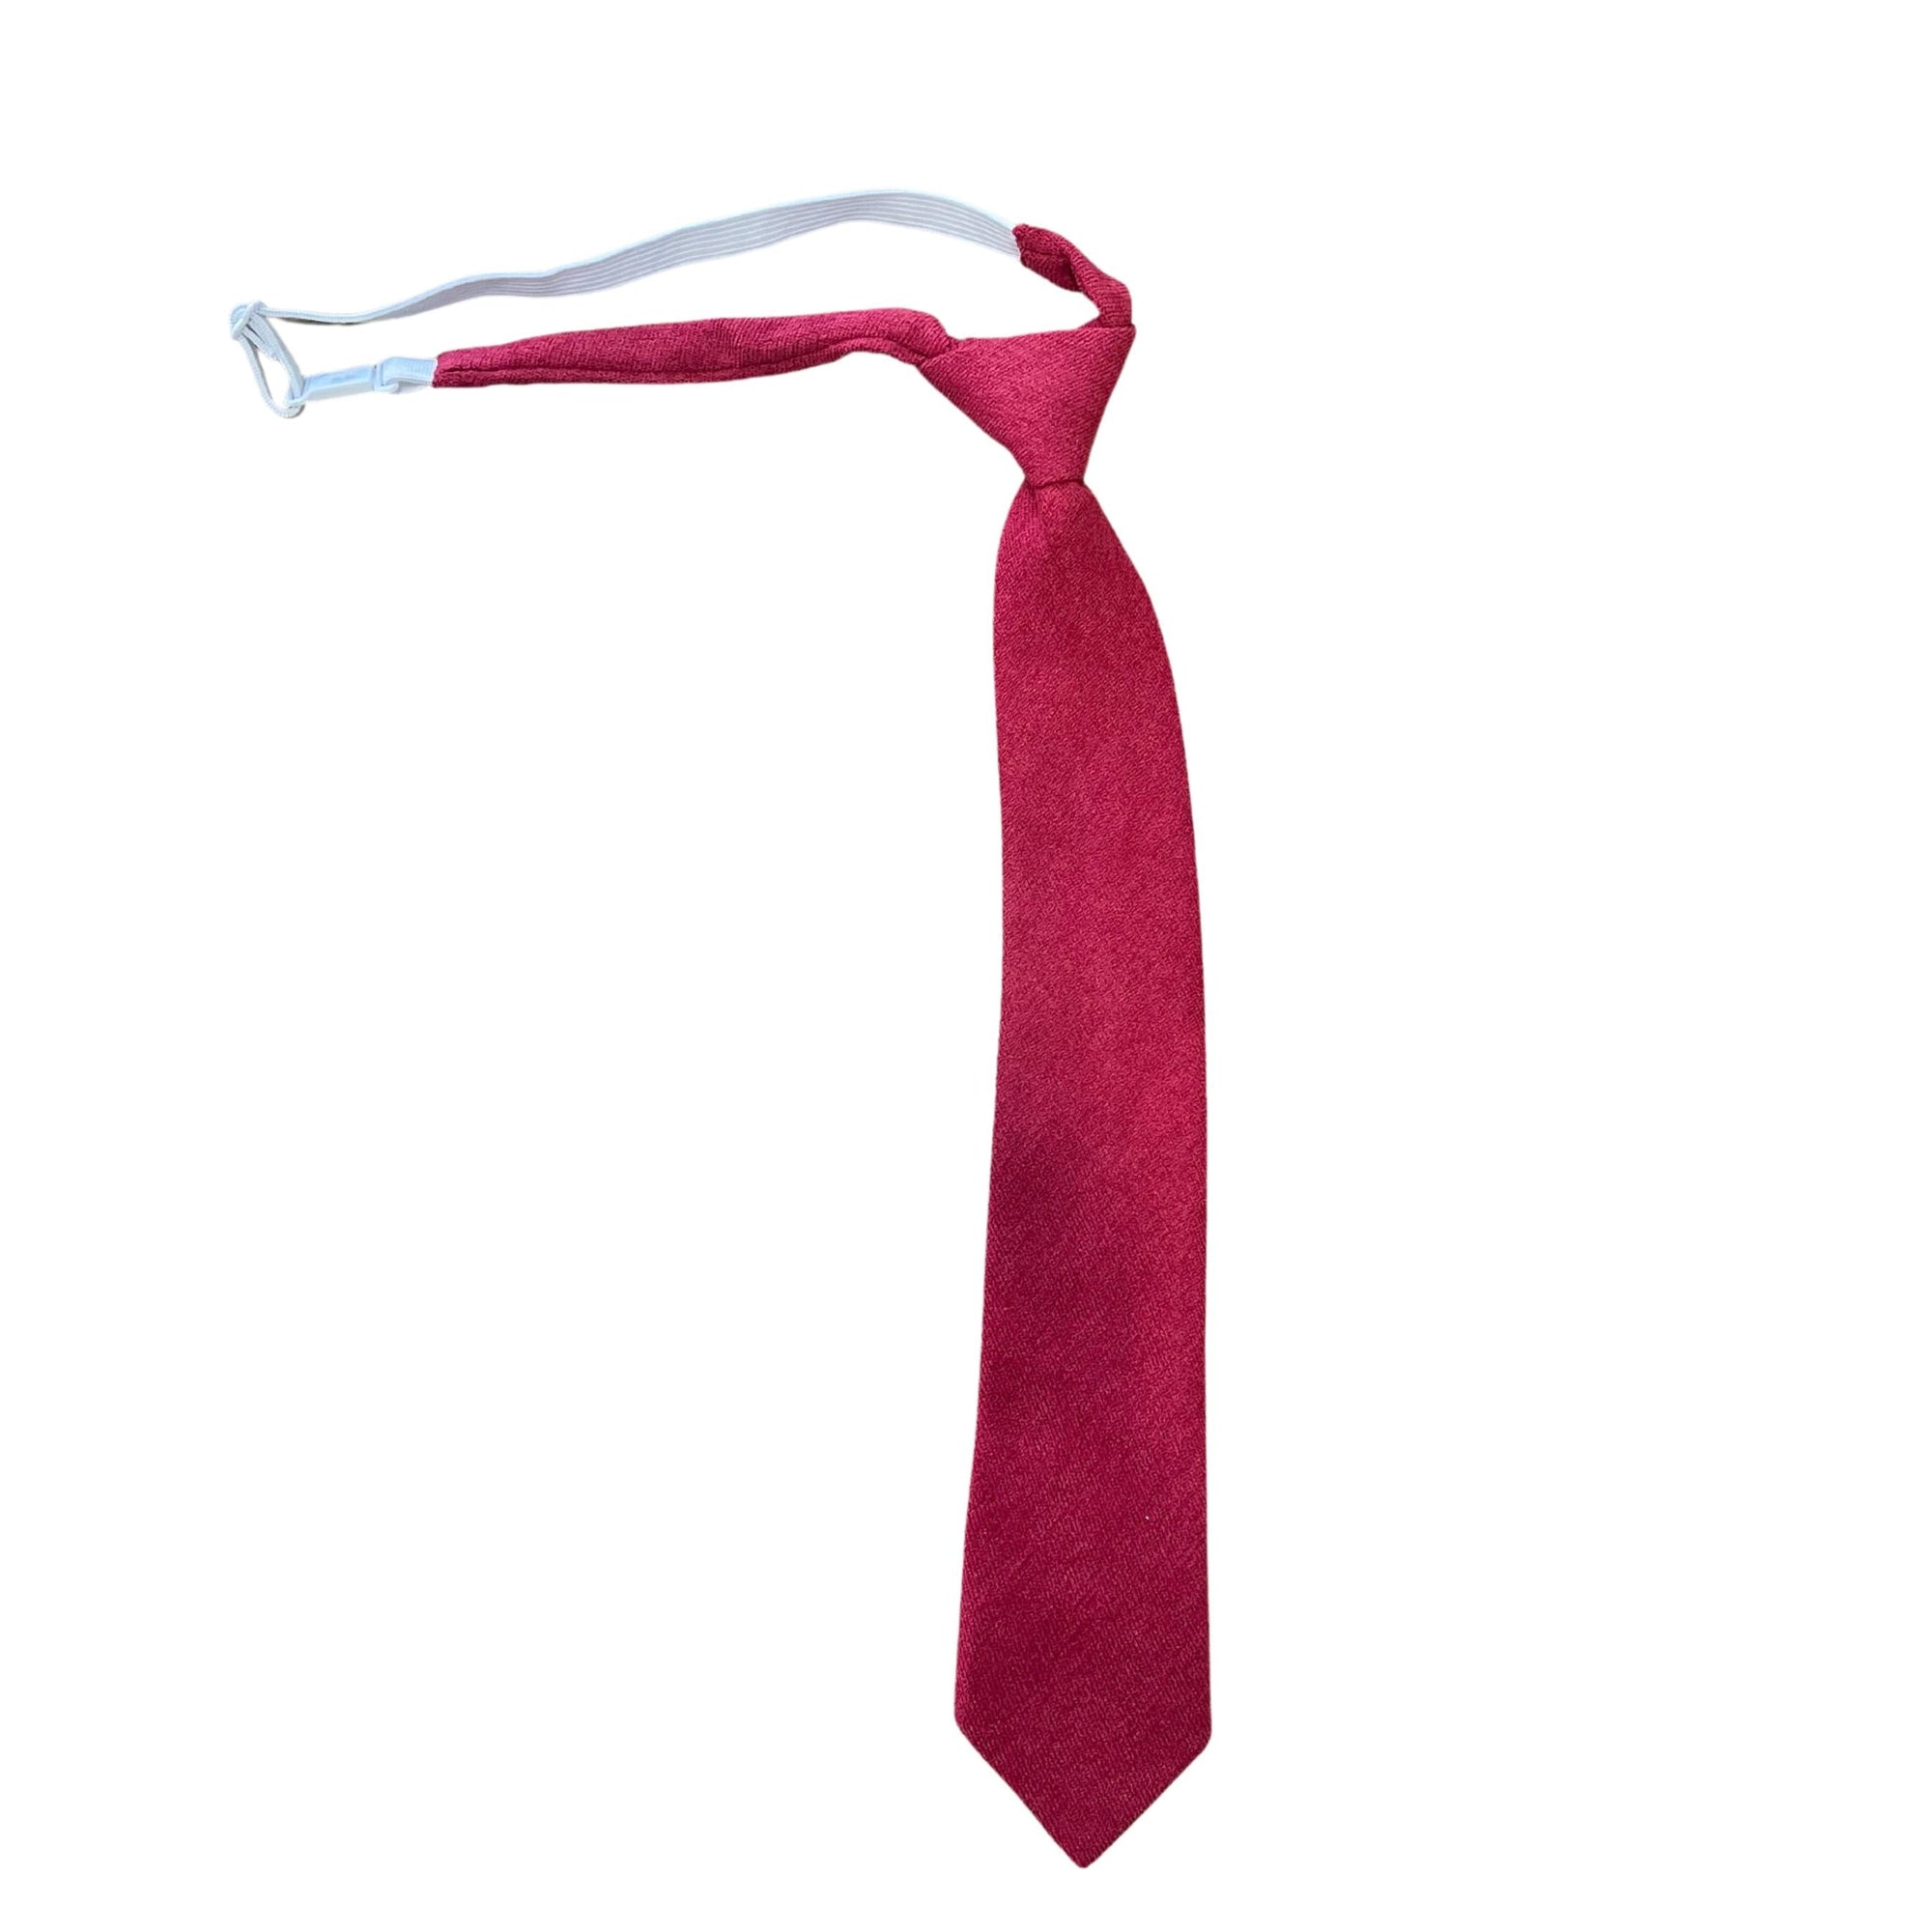 PHOENIX Boys Floral Clip On Tie 2.3 for kids toddler child - MYTIESHOP-Color: Wine Red Material: Cotton Blend Approx Size: Max width: 6.5 cm / 2.4 inches Length: 14 Inches Strap Ties around color Matching Adult Tie https://mytieshop.com/collections/children-ties/products/phoenix-kids-red-floral-pre-tied-bow-tie kids clip on ties for wedding and engagements boys clip on tie kids neckties ties for kids ties for boys groom groomsmen toddler clip on ties-Mytieshop